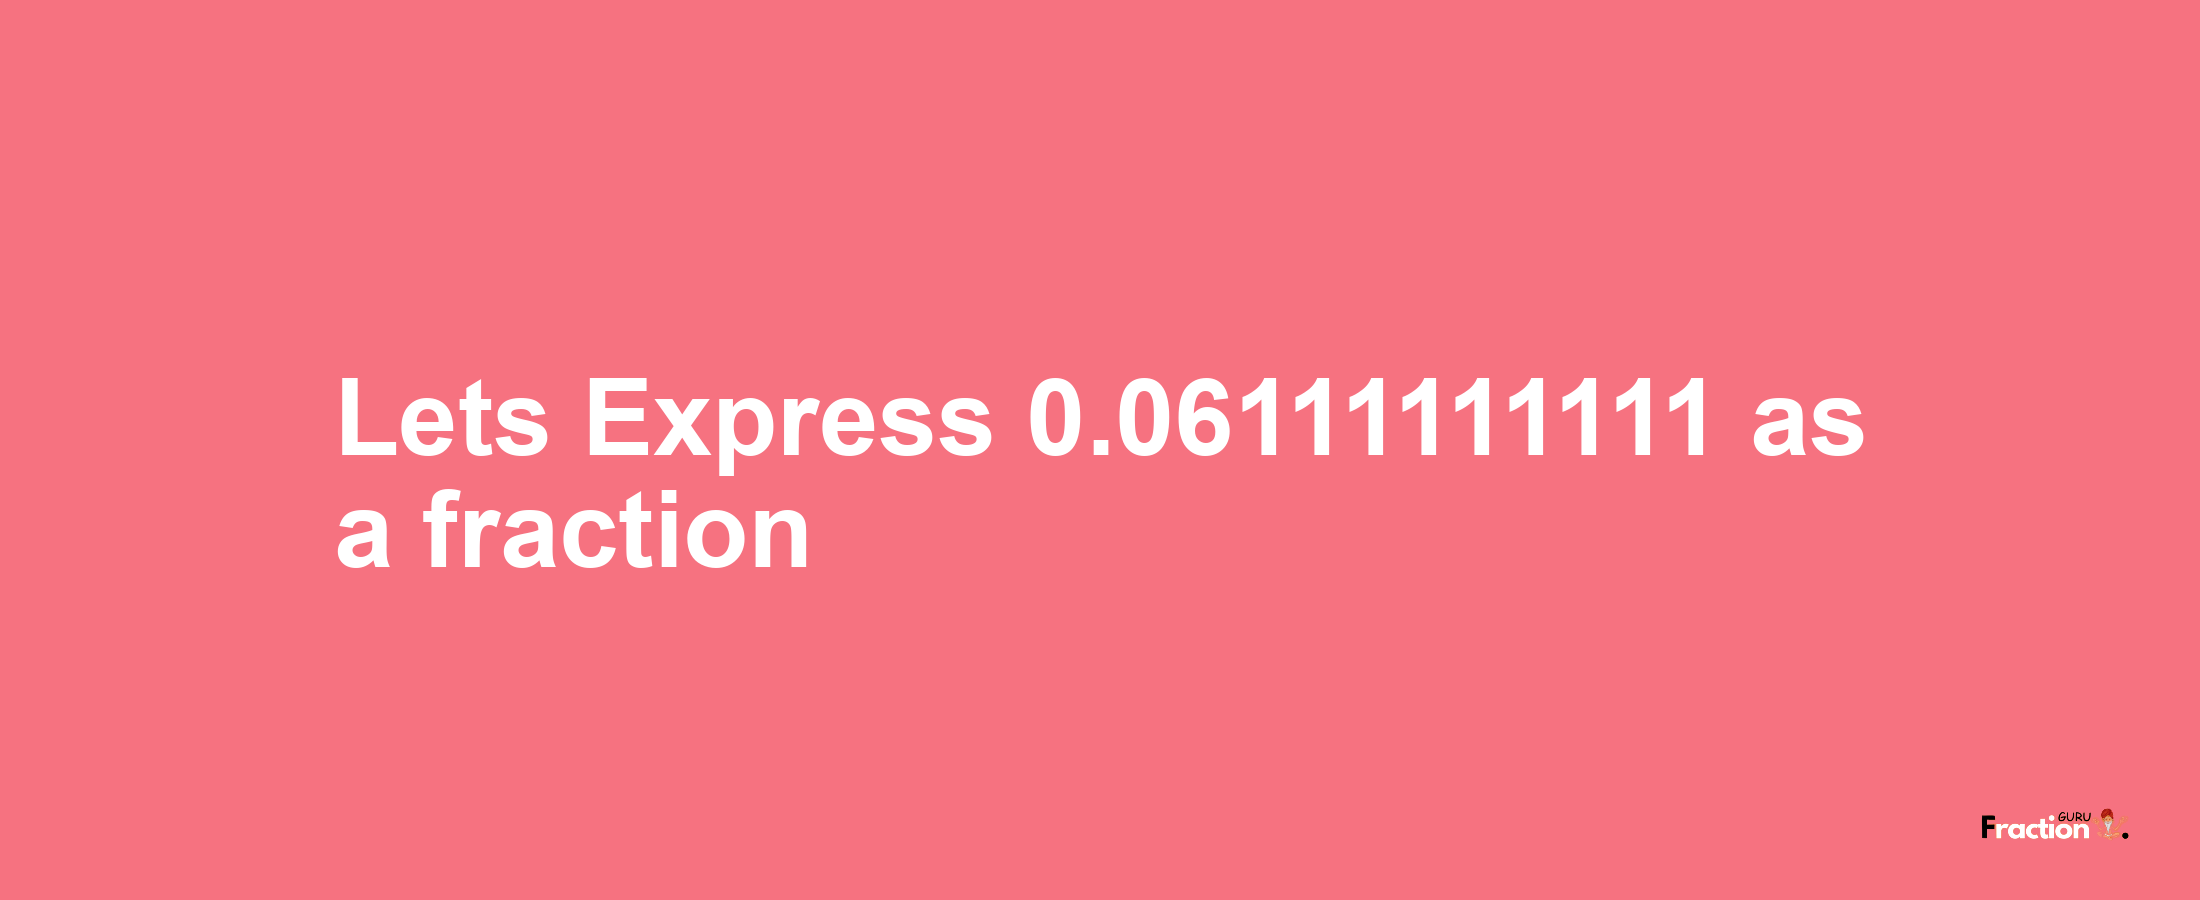 Lets Express 0.06111111111 as afraction